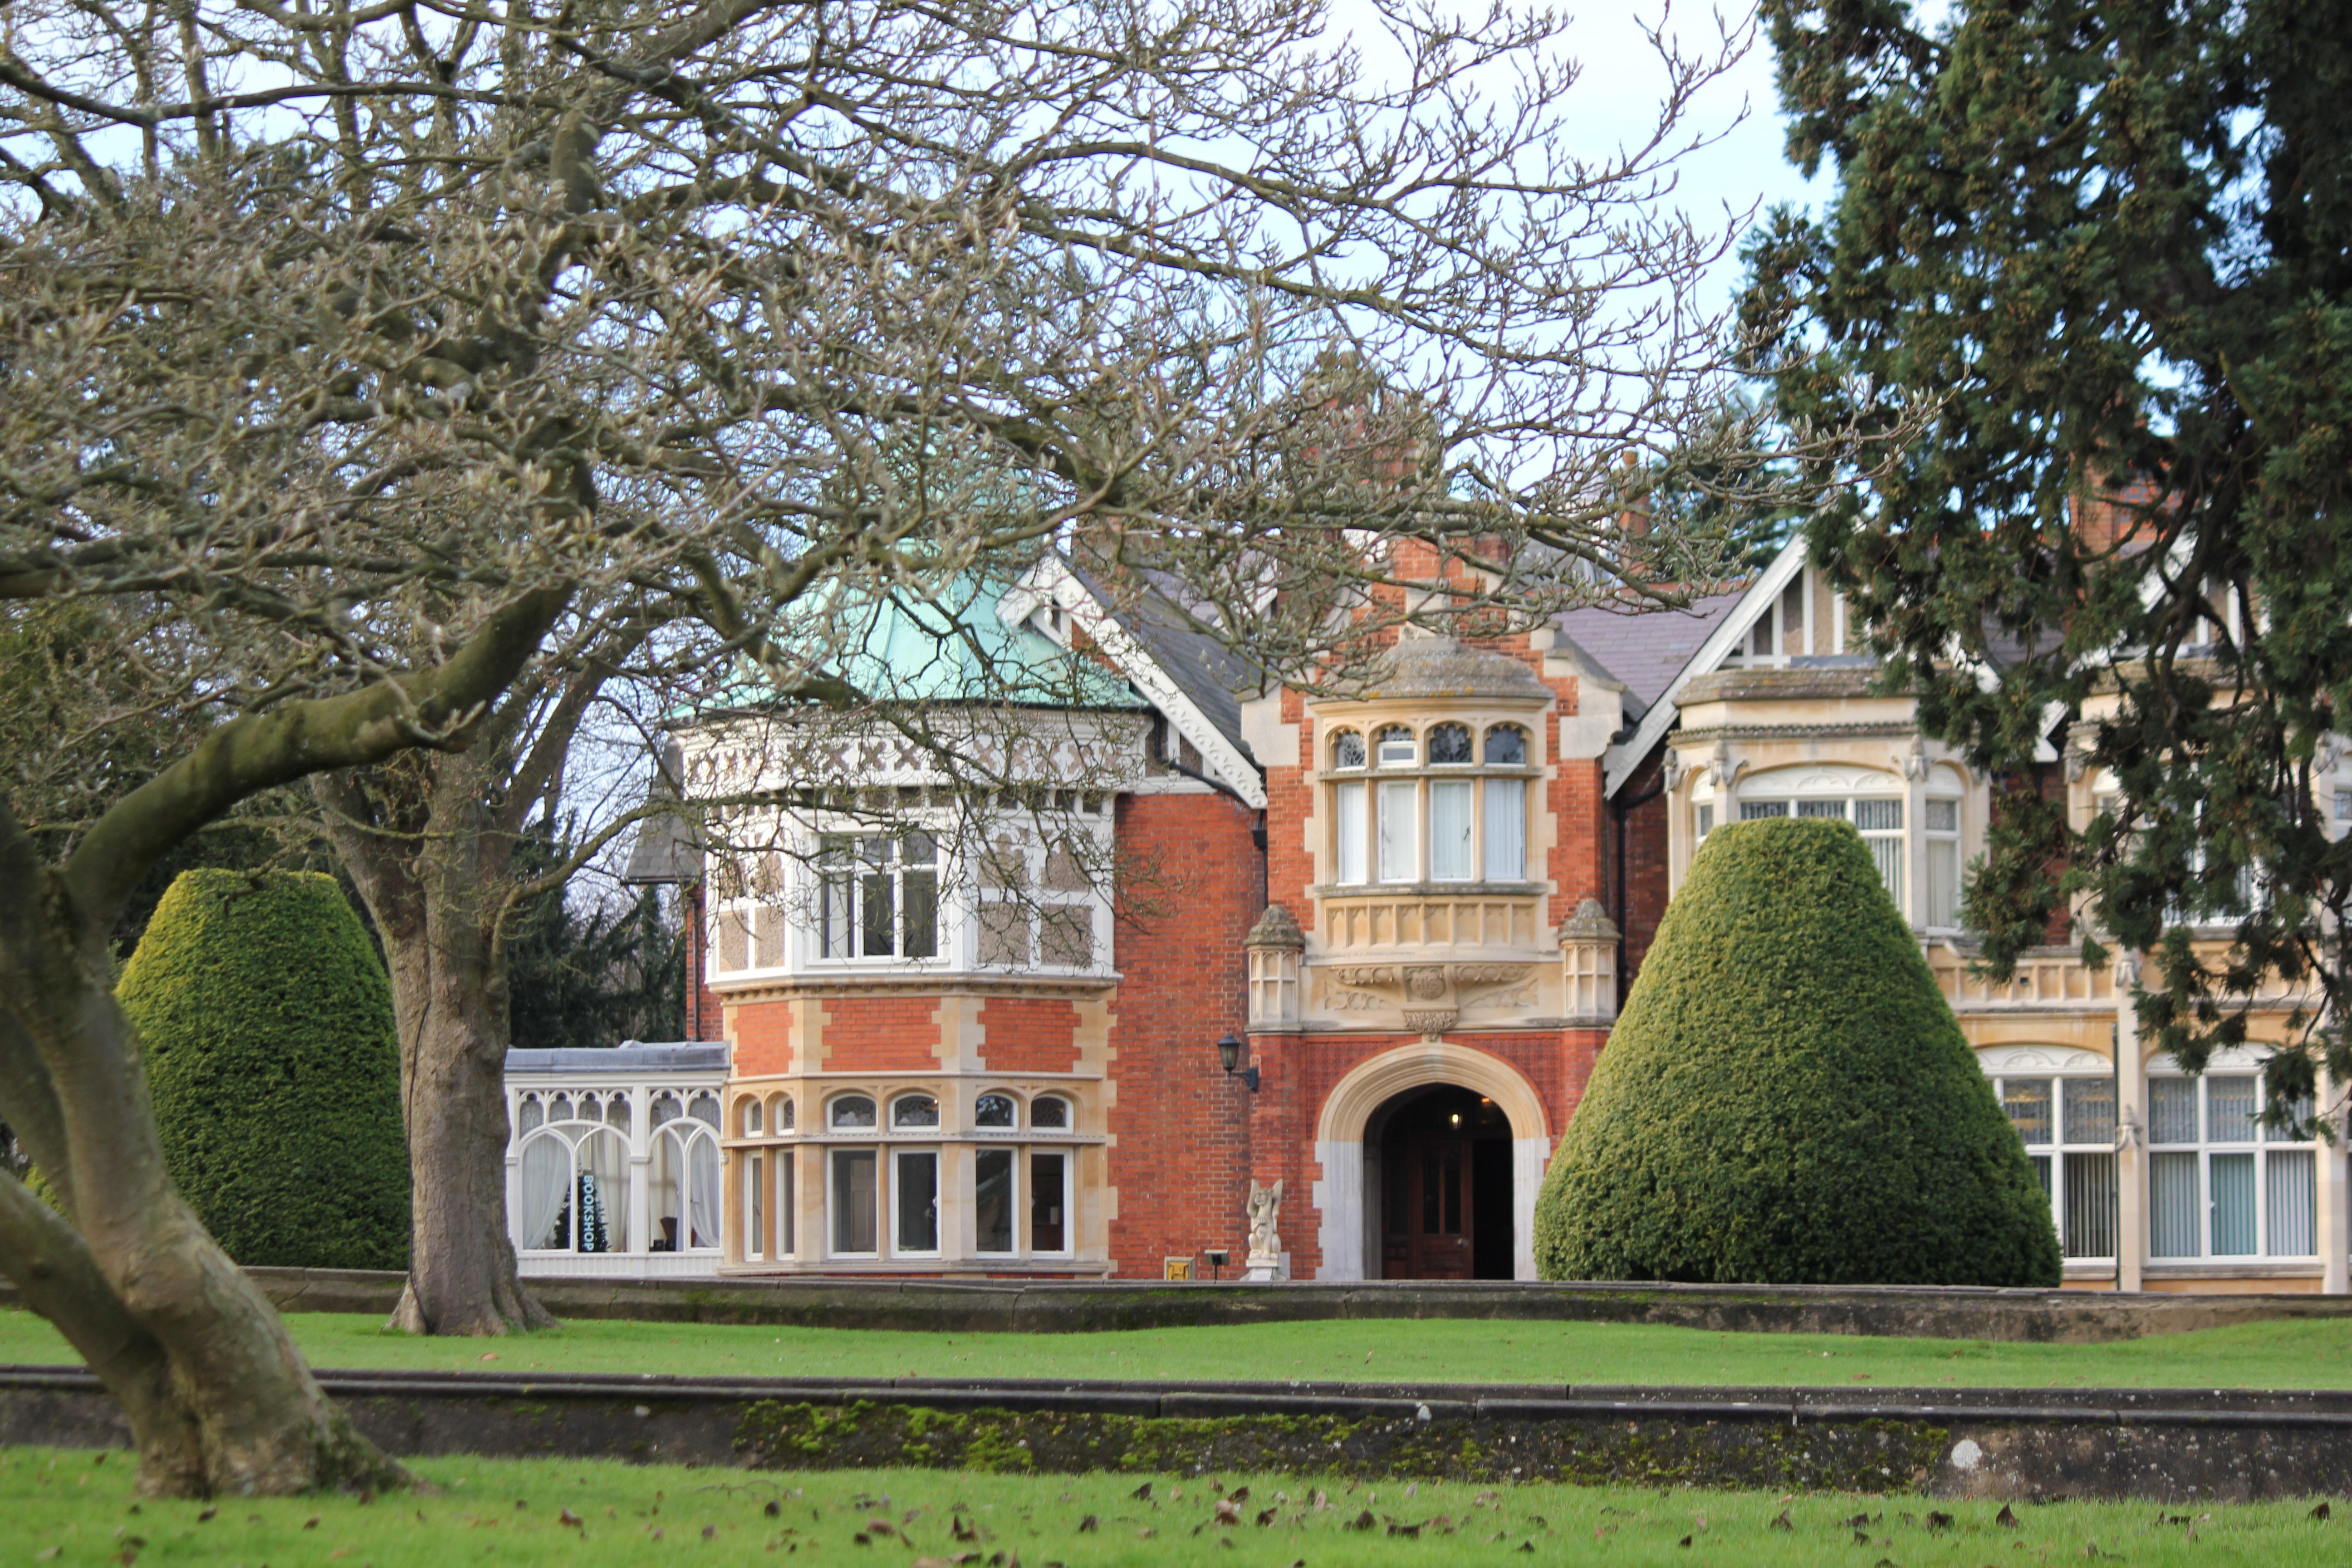 Bletchley Park, a red brick building surrounded by gardens